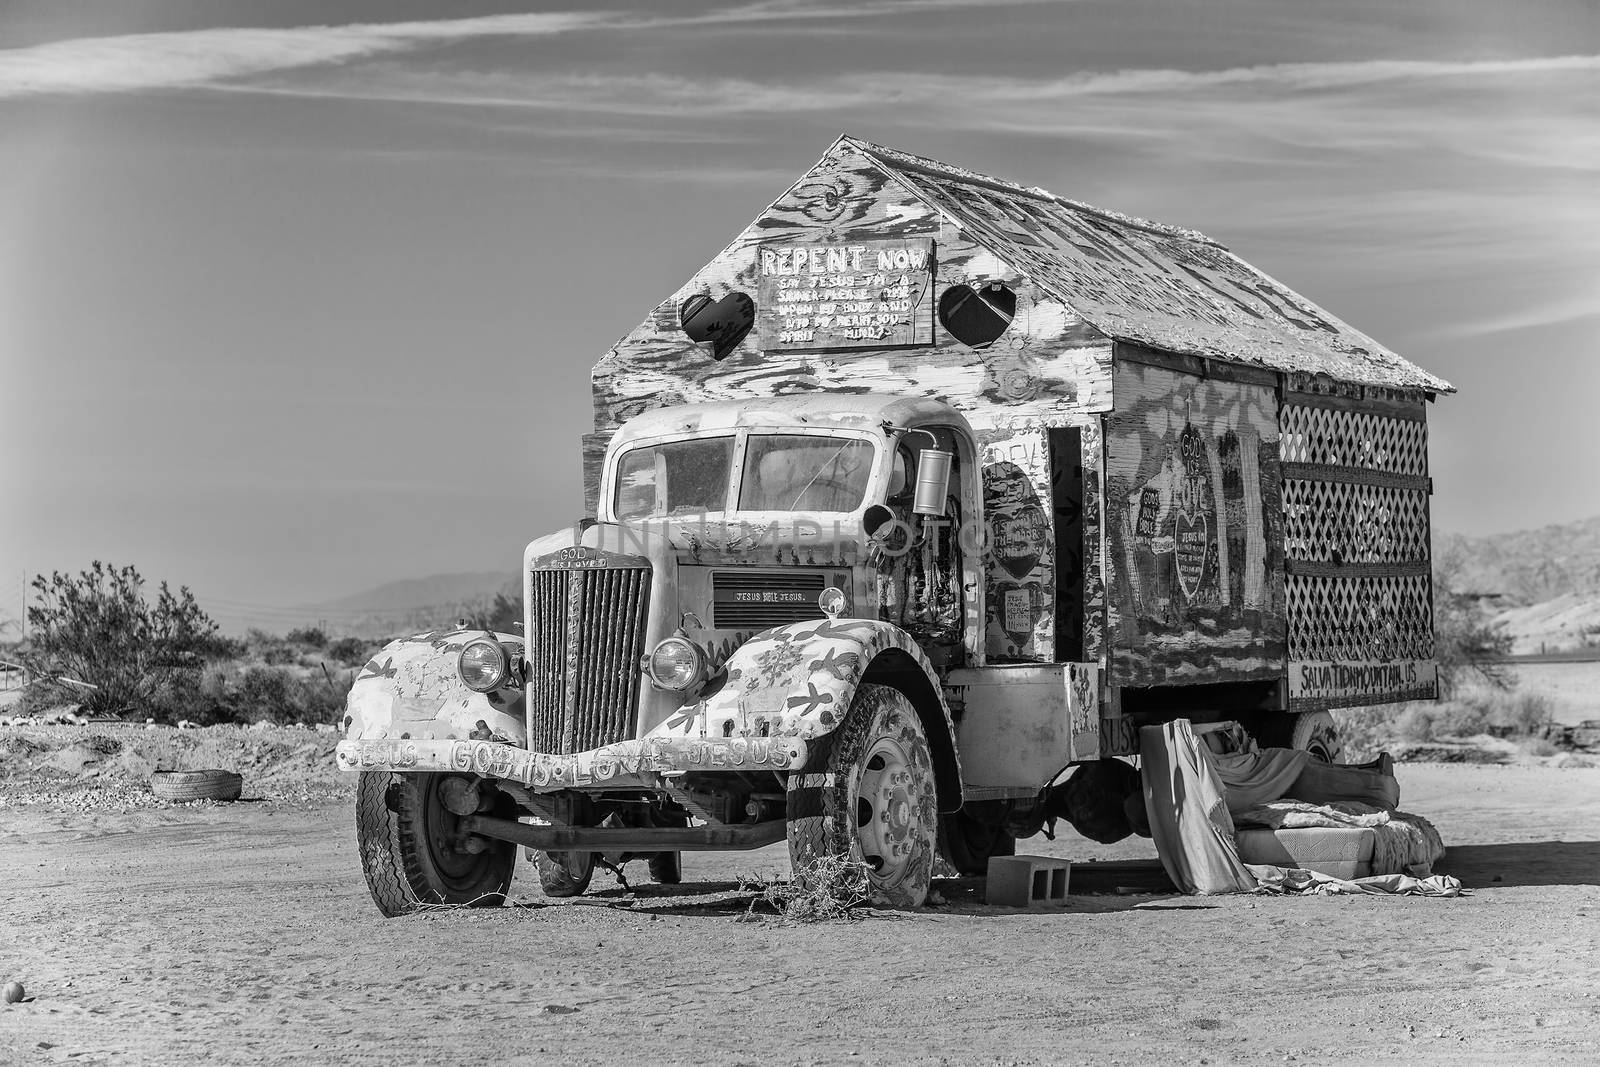 CALIPATRIA, IMPERIAL COUNTY, CALIFORNIA, USA - NOVEMBER 28: Black and white rendering of Bible truck outsider art installation at Salvation Mountain on November 28, 2014 in at Calipatria, California, USA.